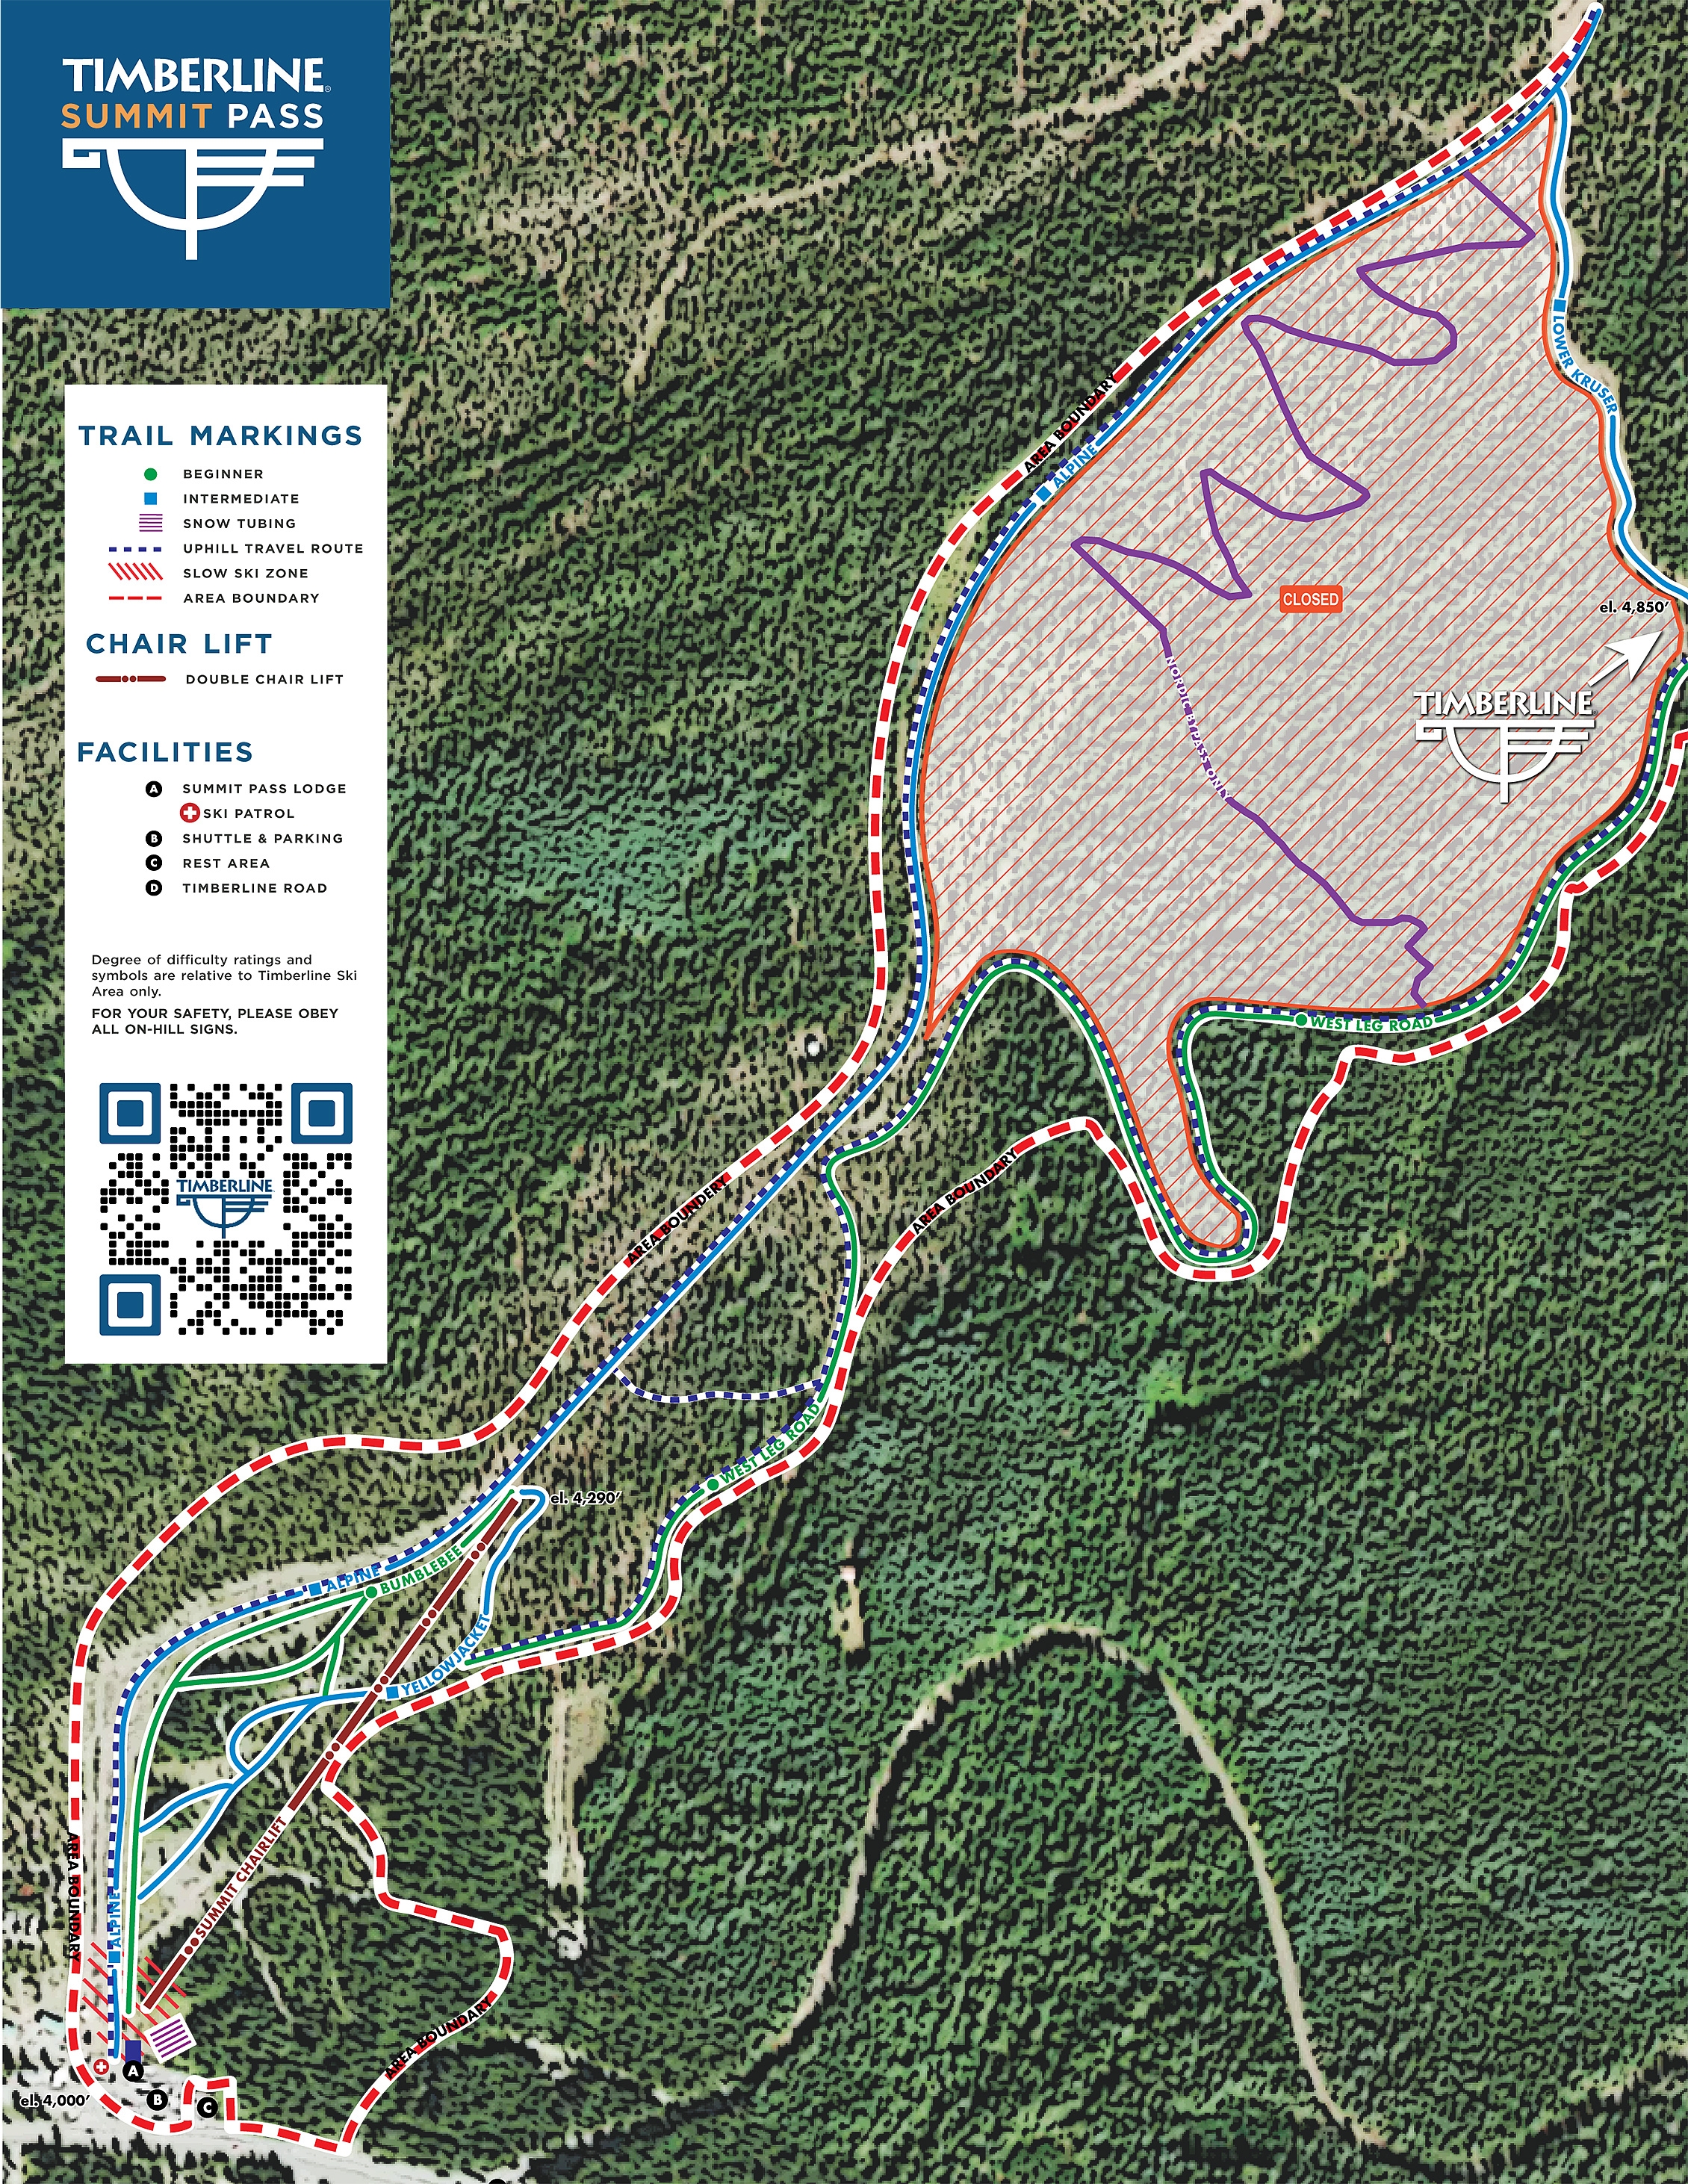 SKI TRAIL MAP FOR TIMBERLINE SUMMIT PASS